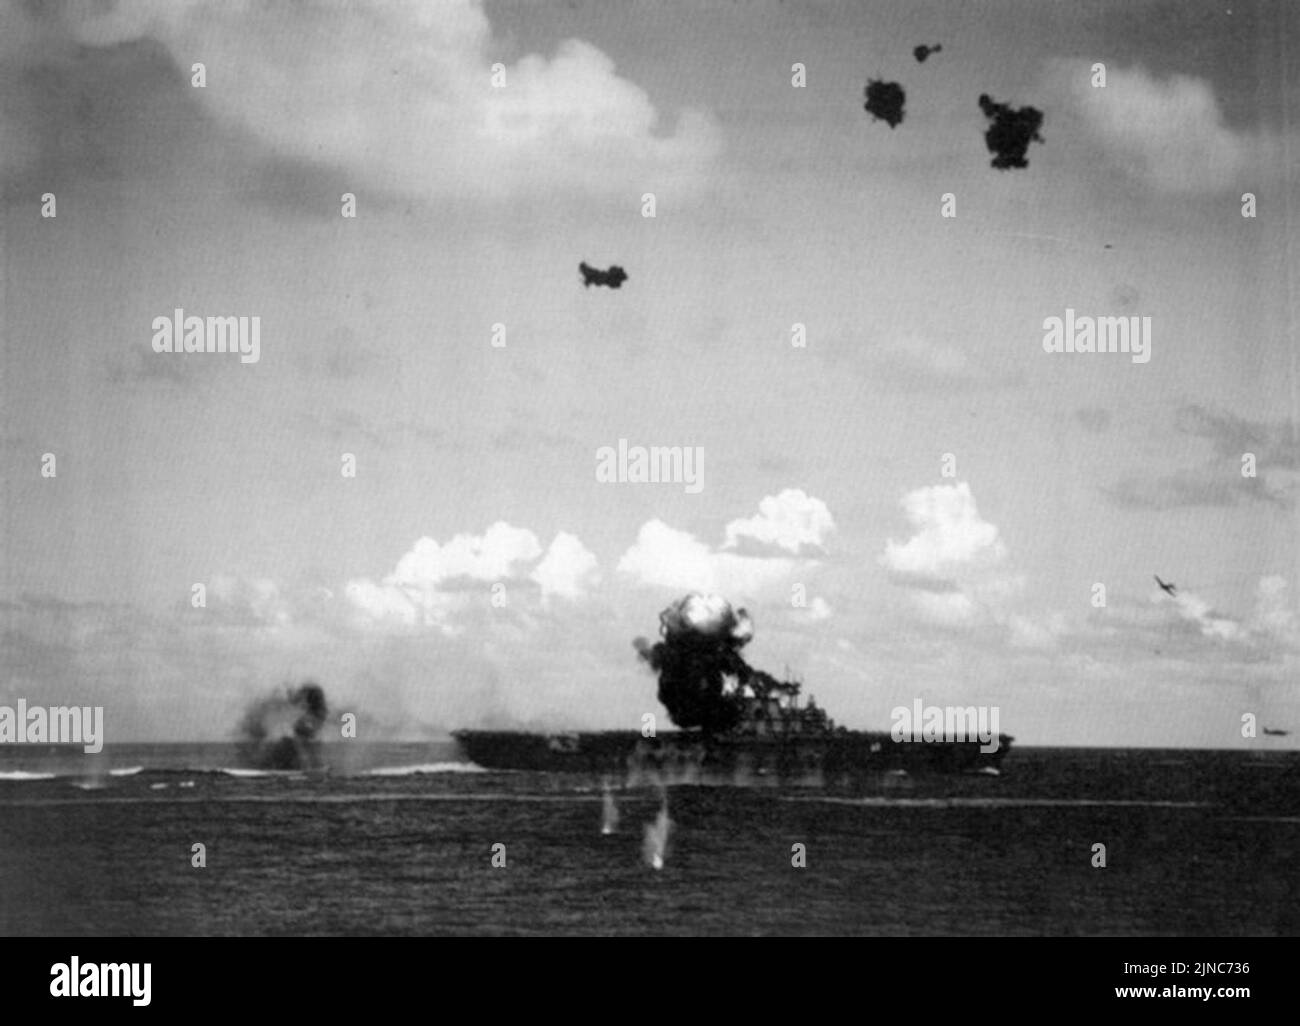 A damaged Japanese dive bomber explodes on the deck of the US Navy aircraft carrier USS Hornet during the Battle of Santa Cruz, 26 October 1942. Stock Photo